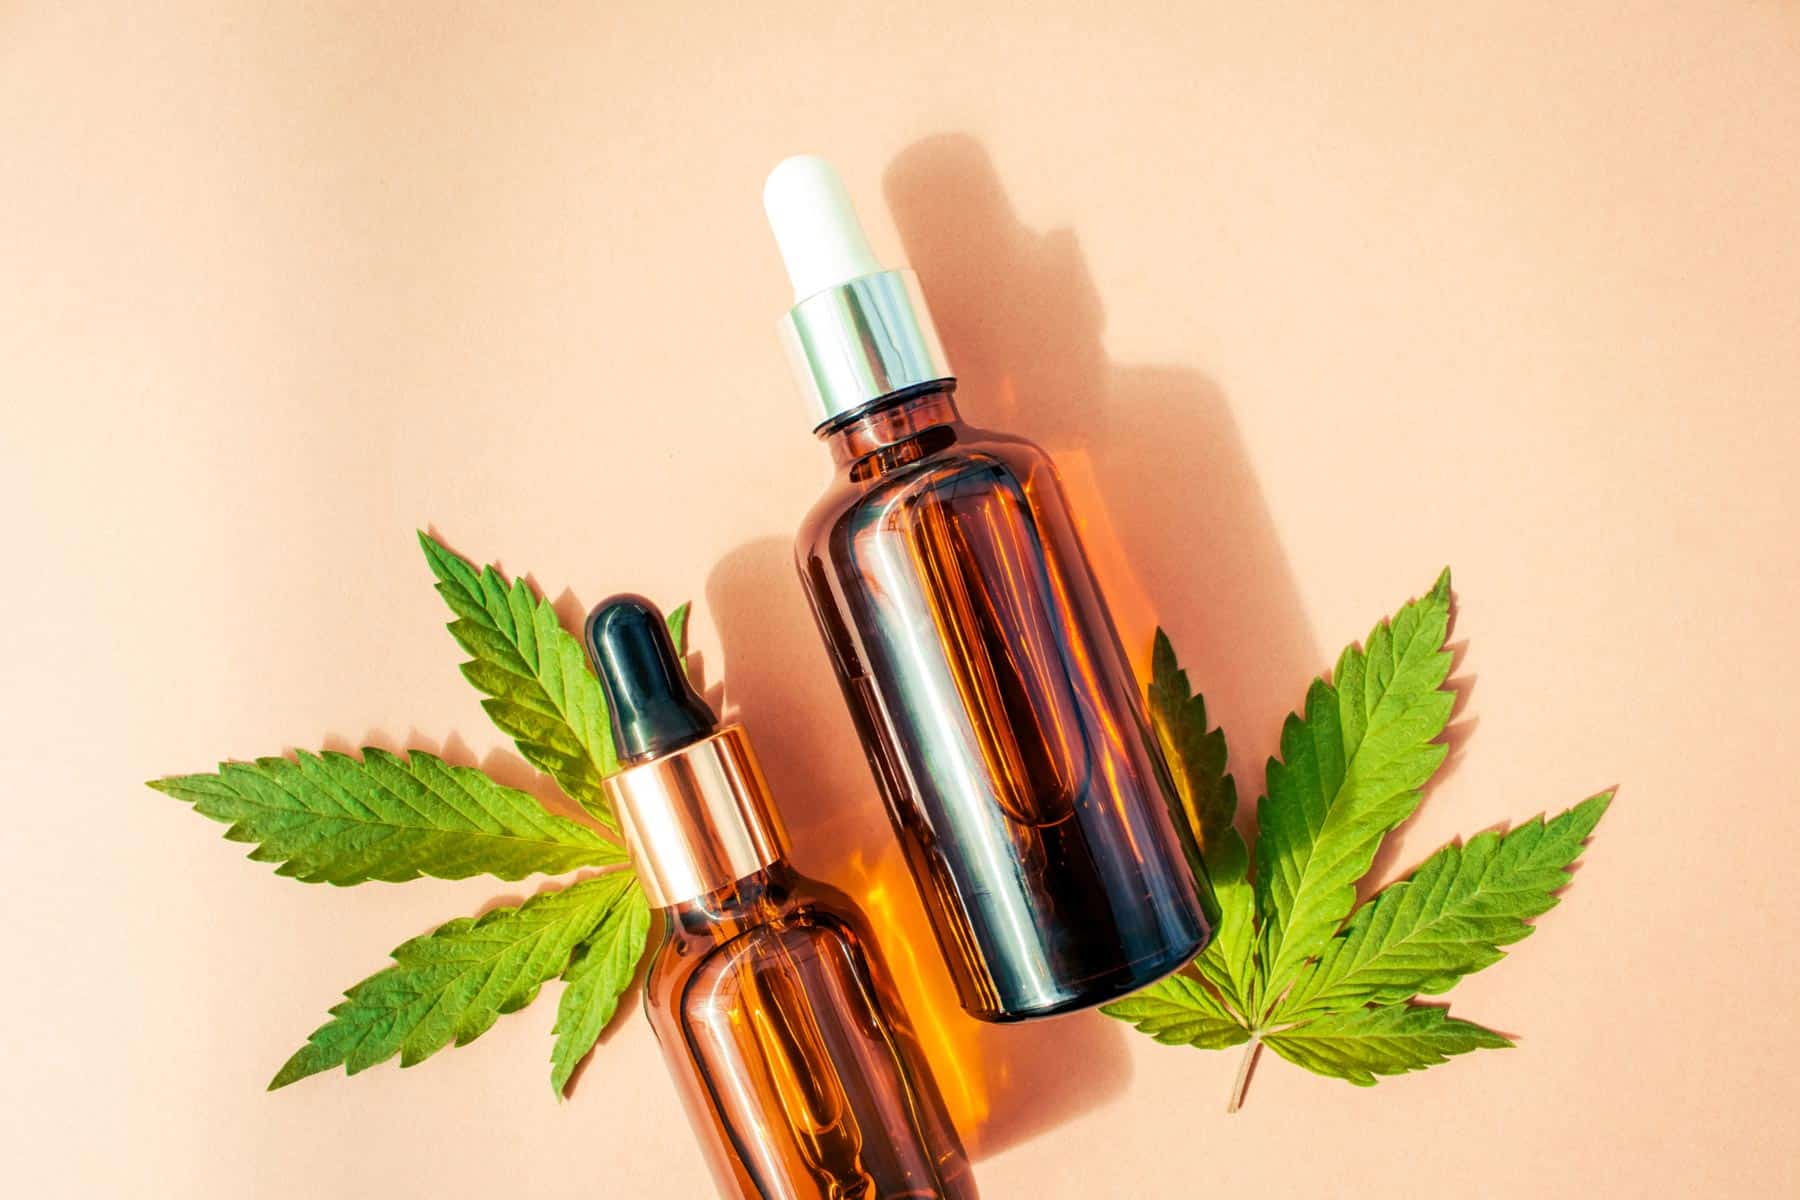 CBD Topicals for Pain Management: A Closer Look at the Research